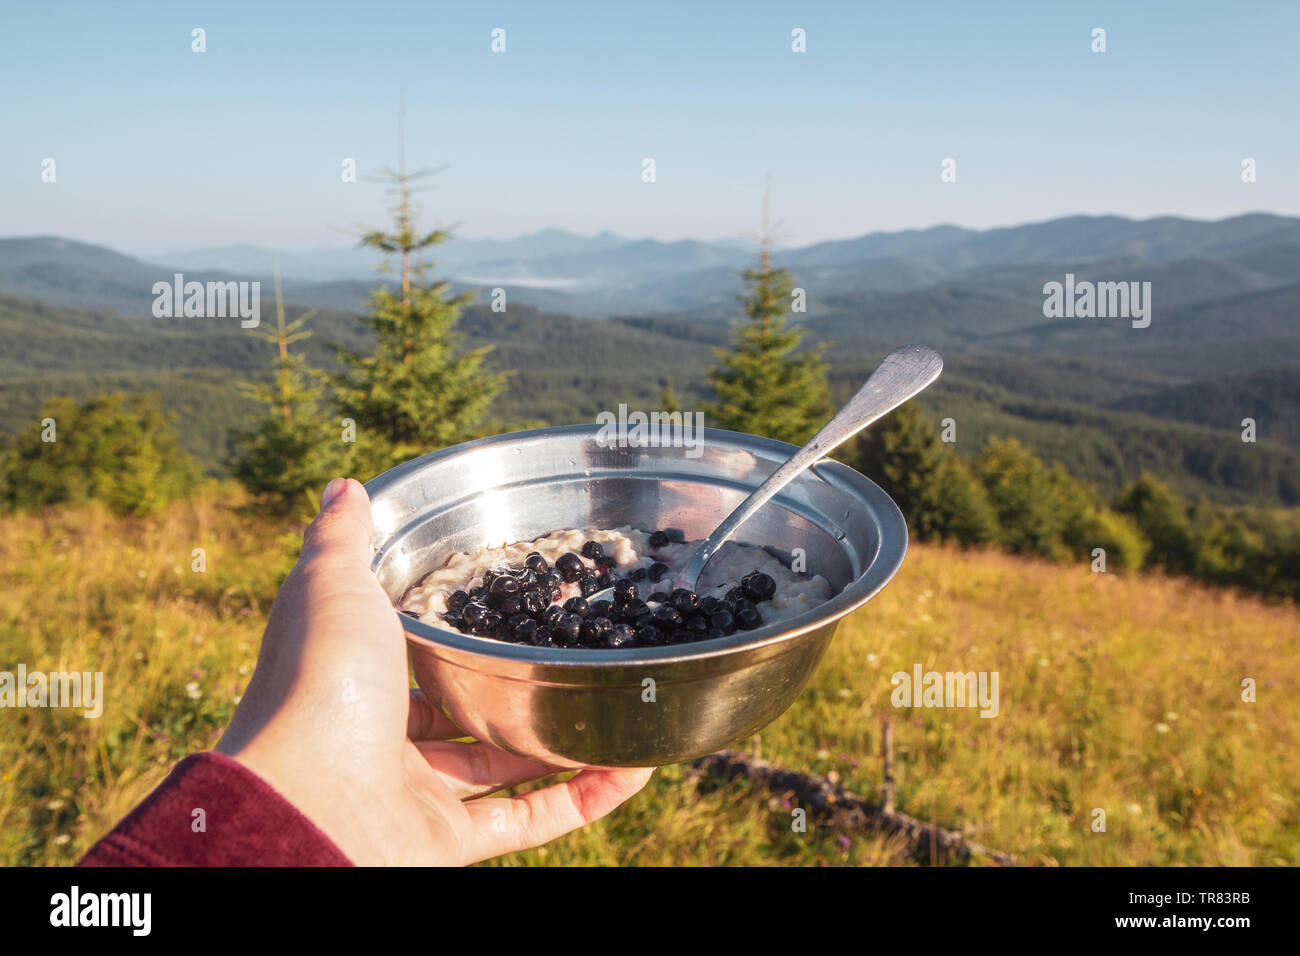 Breakfast in the hike, a bowl of porridge and berries in the female hand on the background of the morning mountain landscape Stock Photo